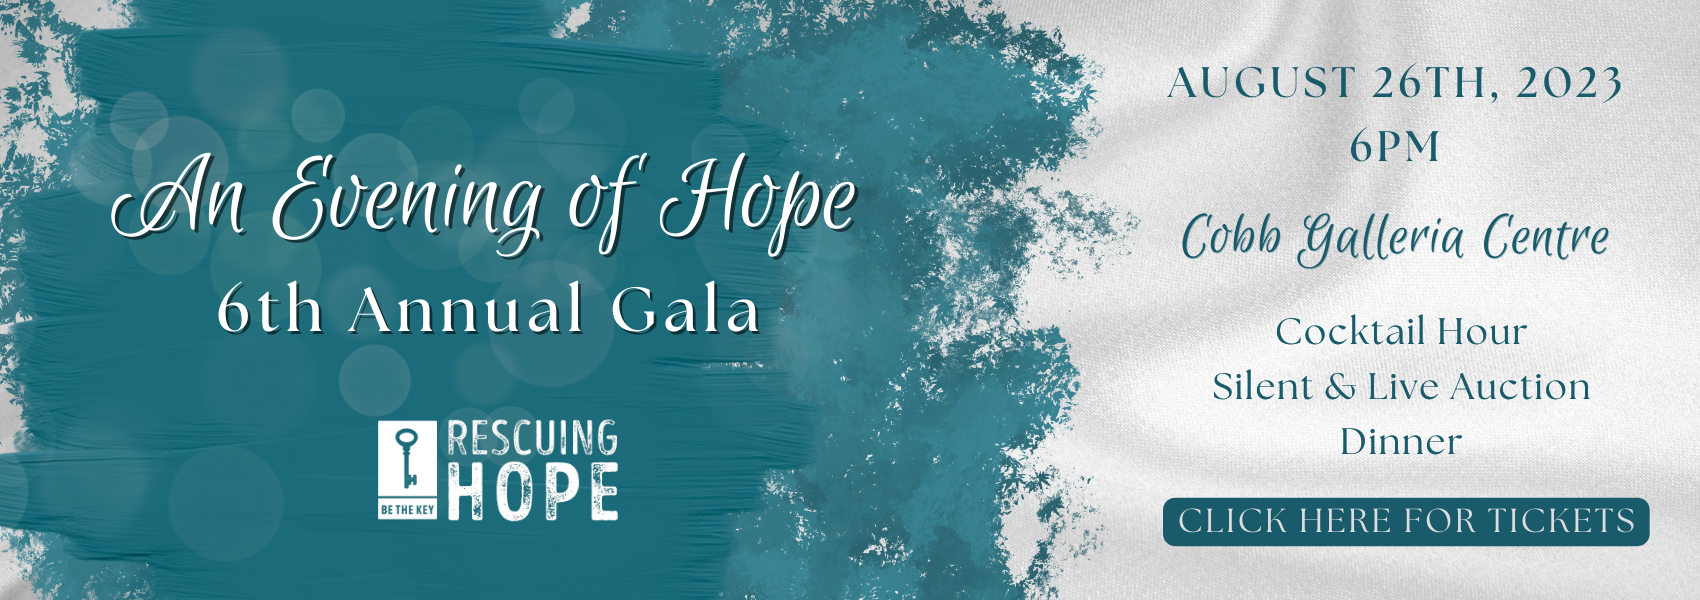 An Evening of Hope - Rescuing Hope 6th Annual Gala- August 26, 2023